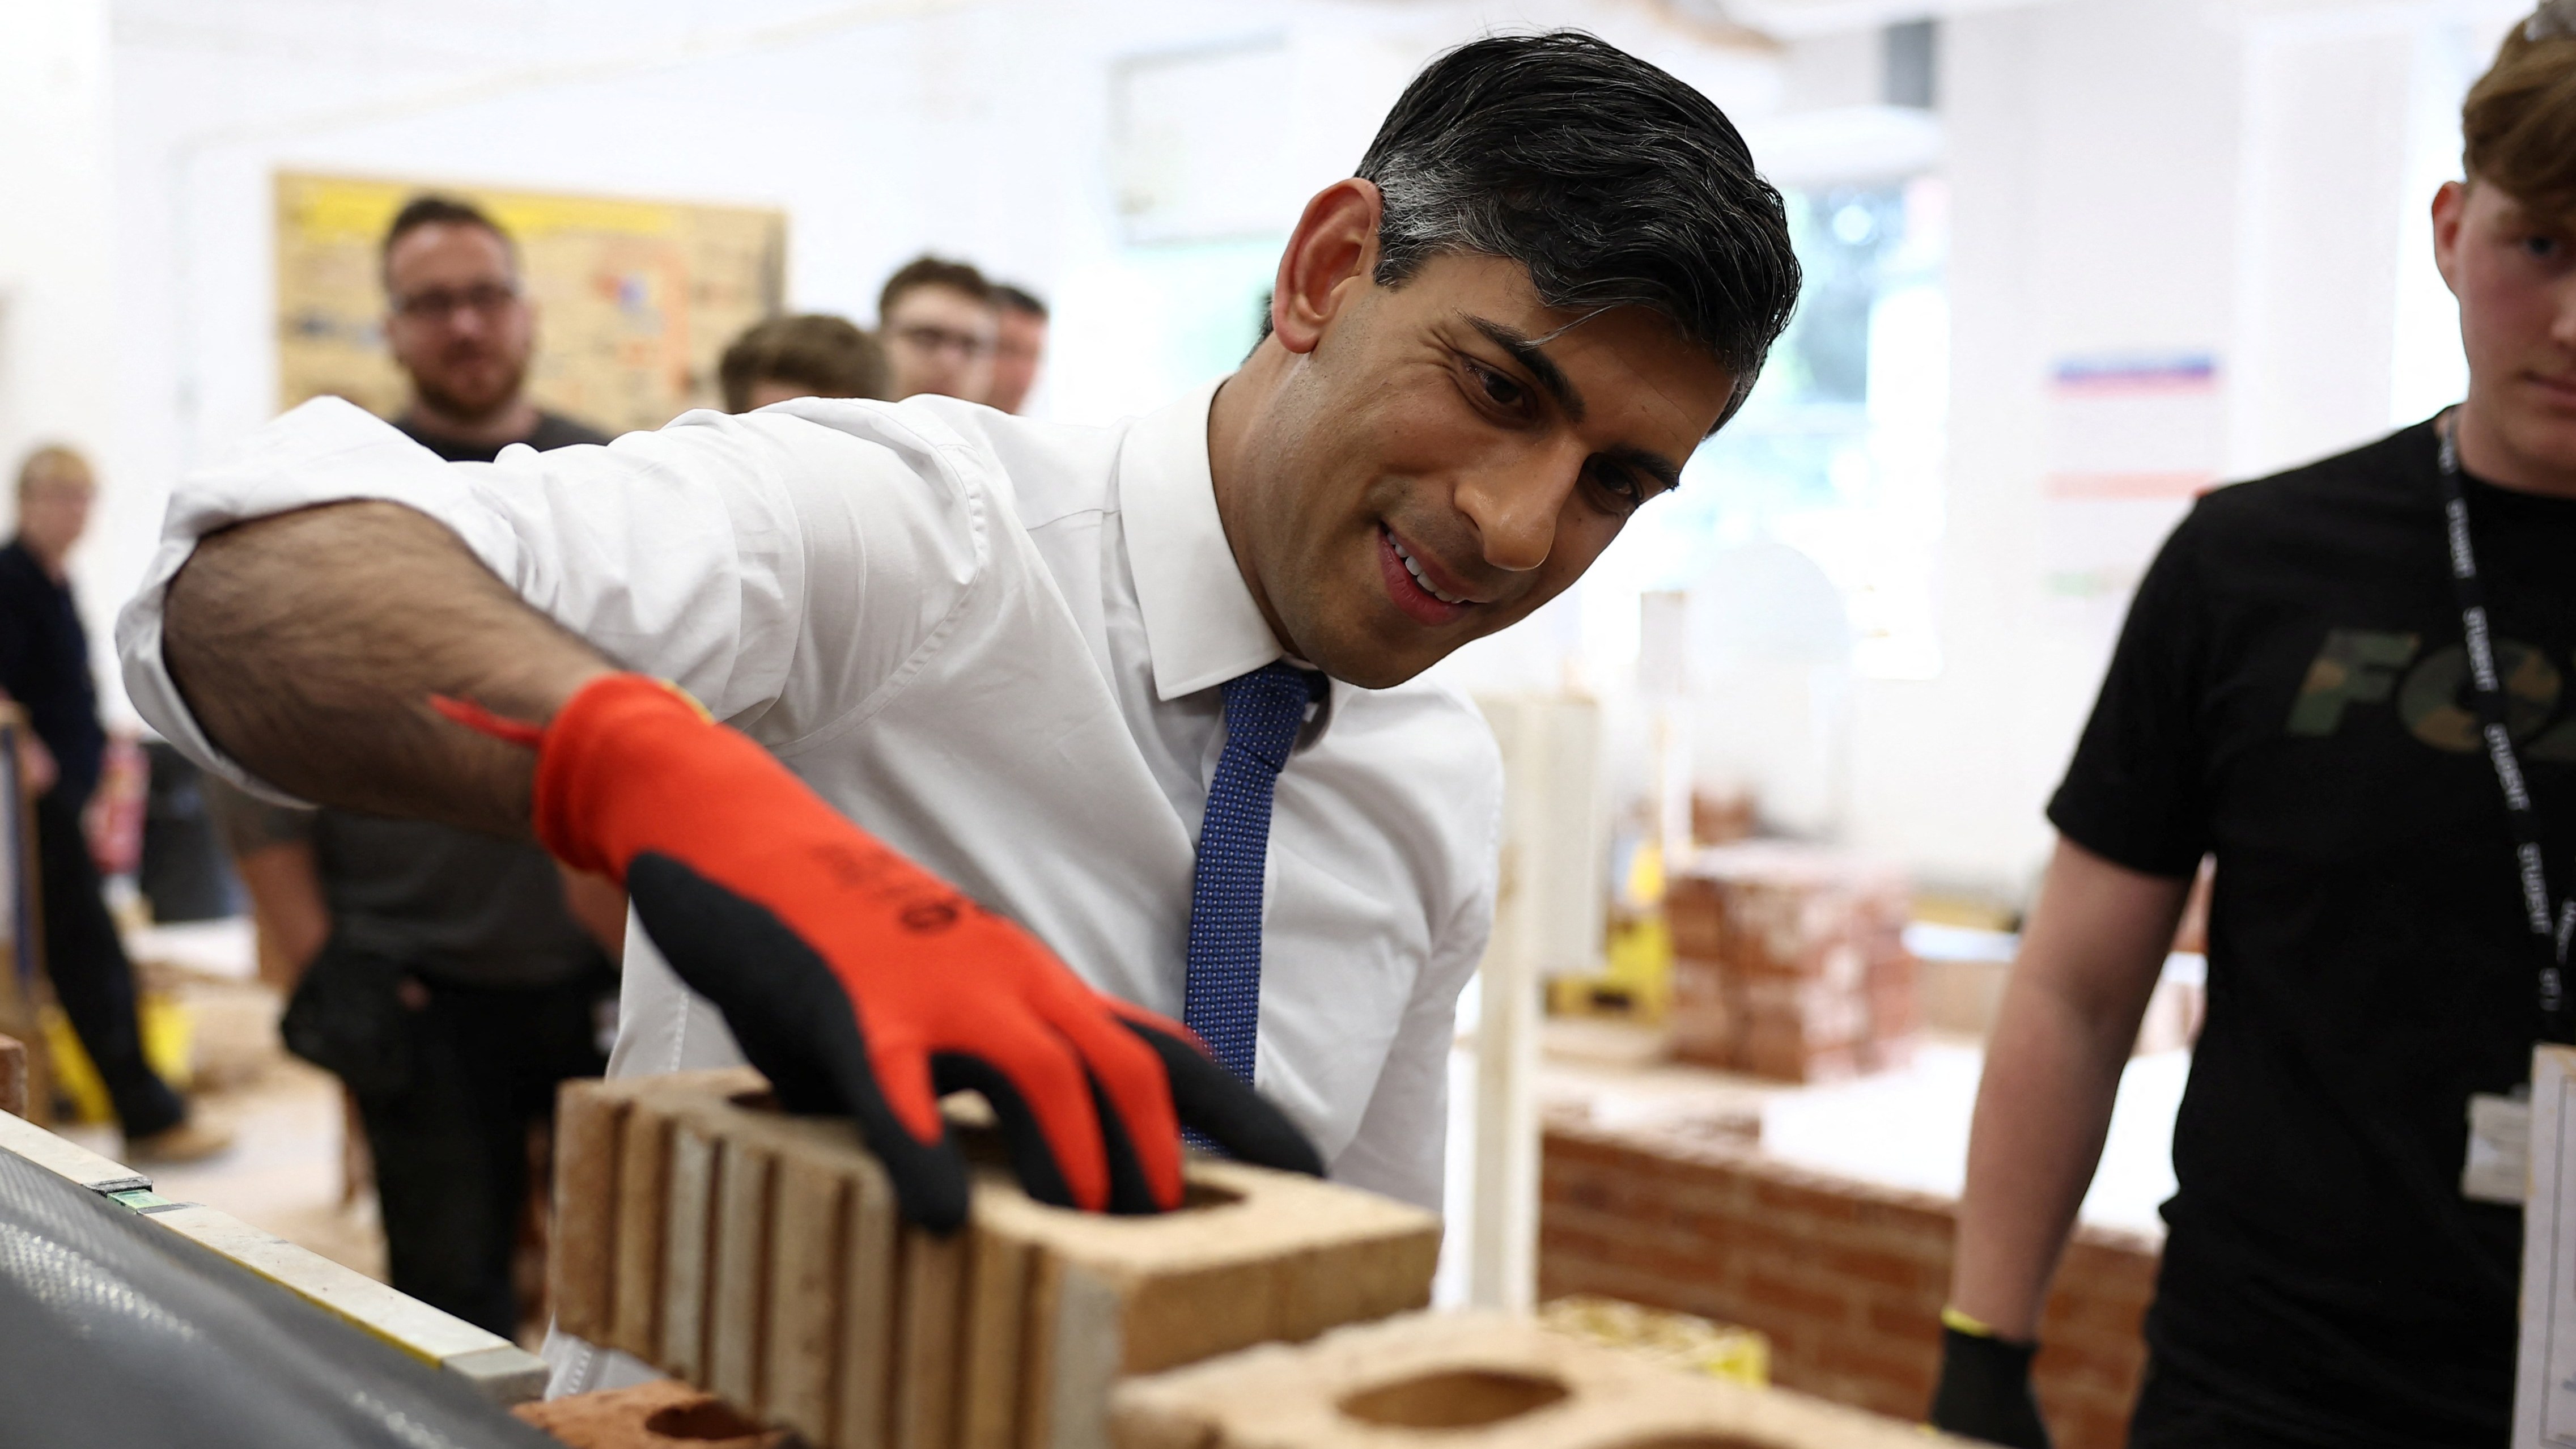 After a week of brighter economic news, Rishi Sunak will argue for more time to build on his plan